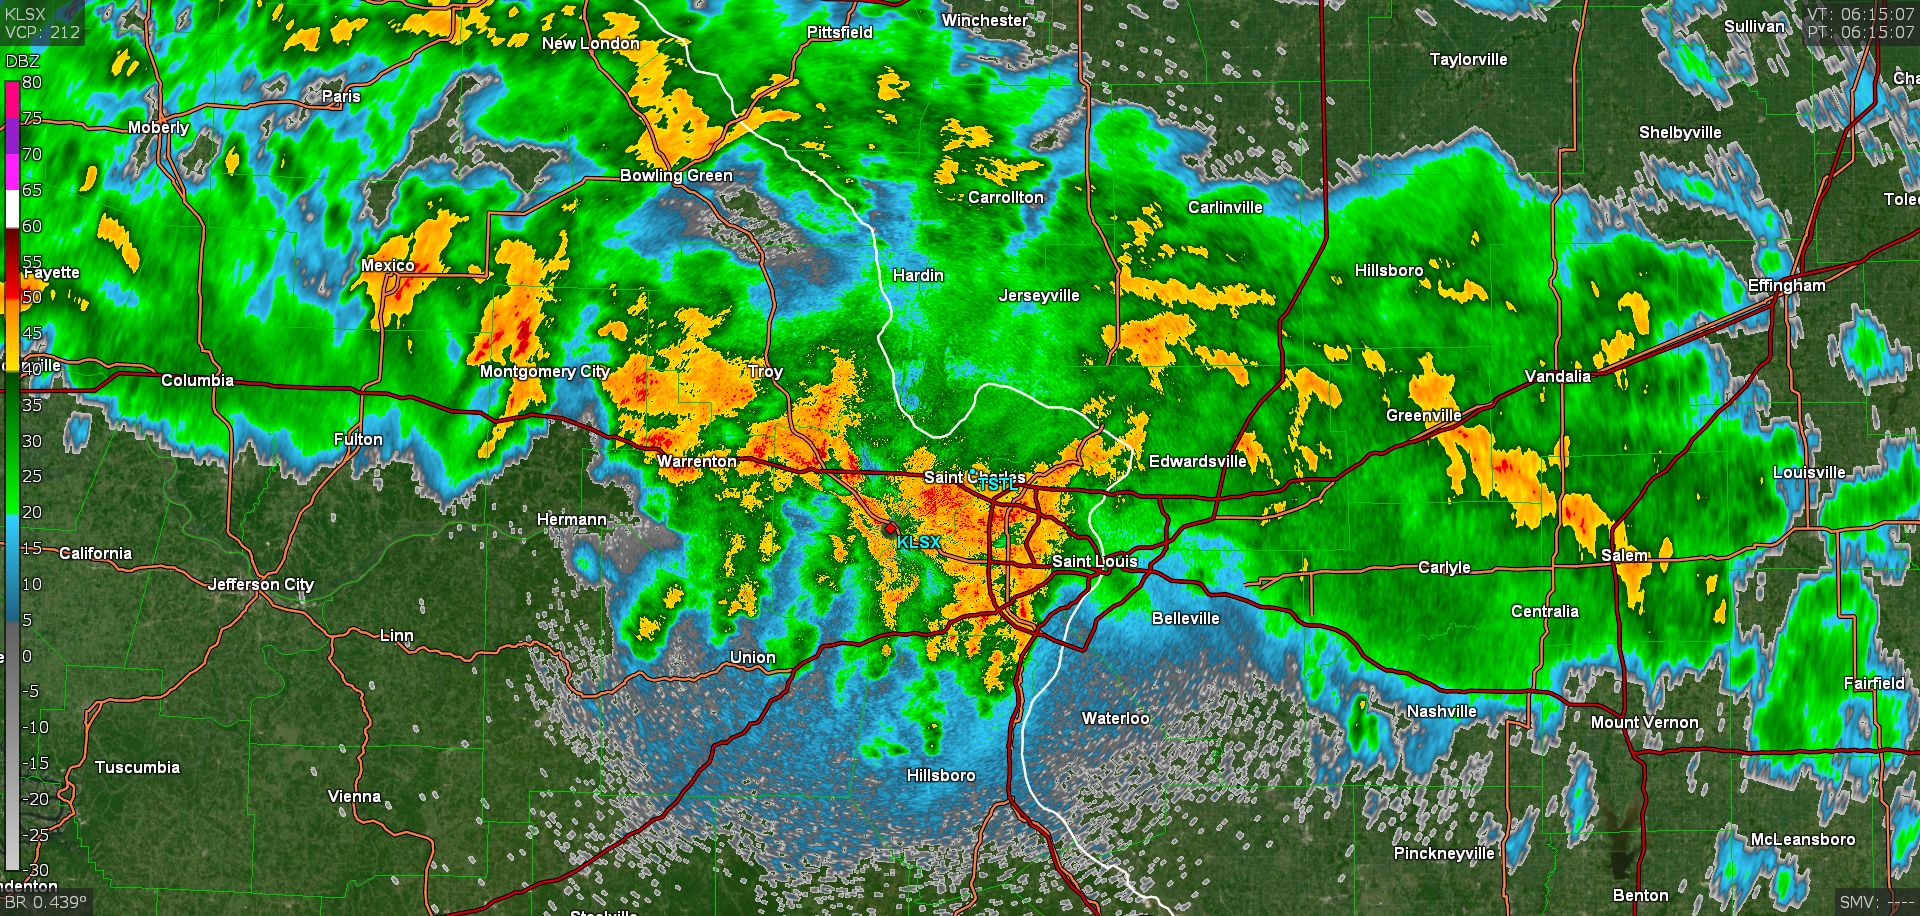 Image of radar reflectivity from KLSX in St. Louis valid at 1:45am July 26th.